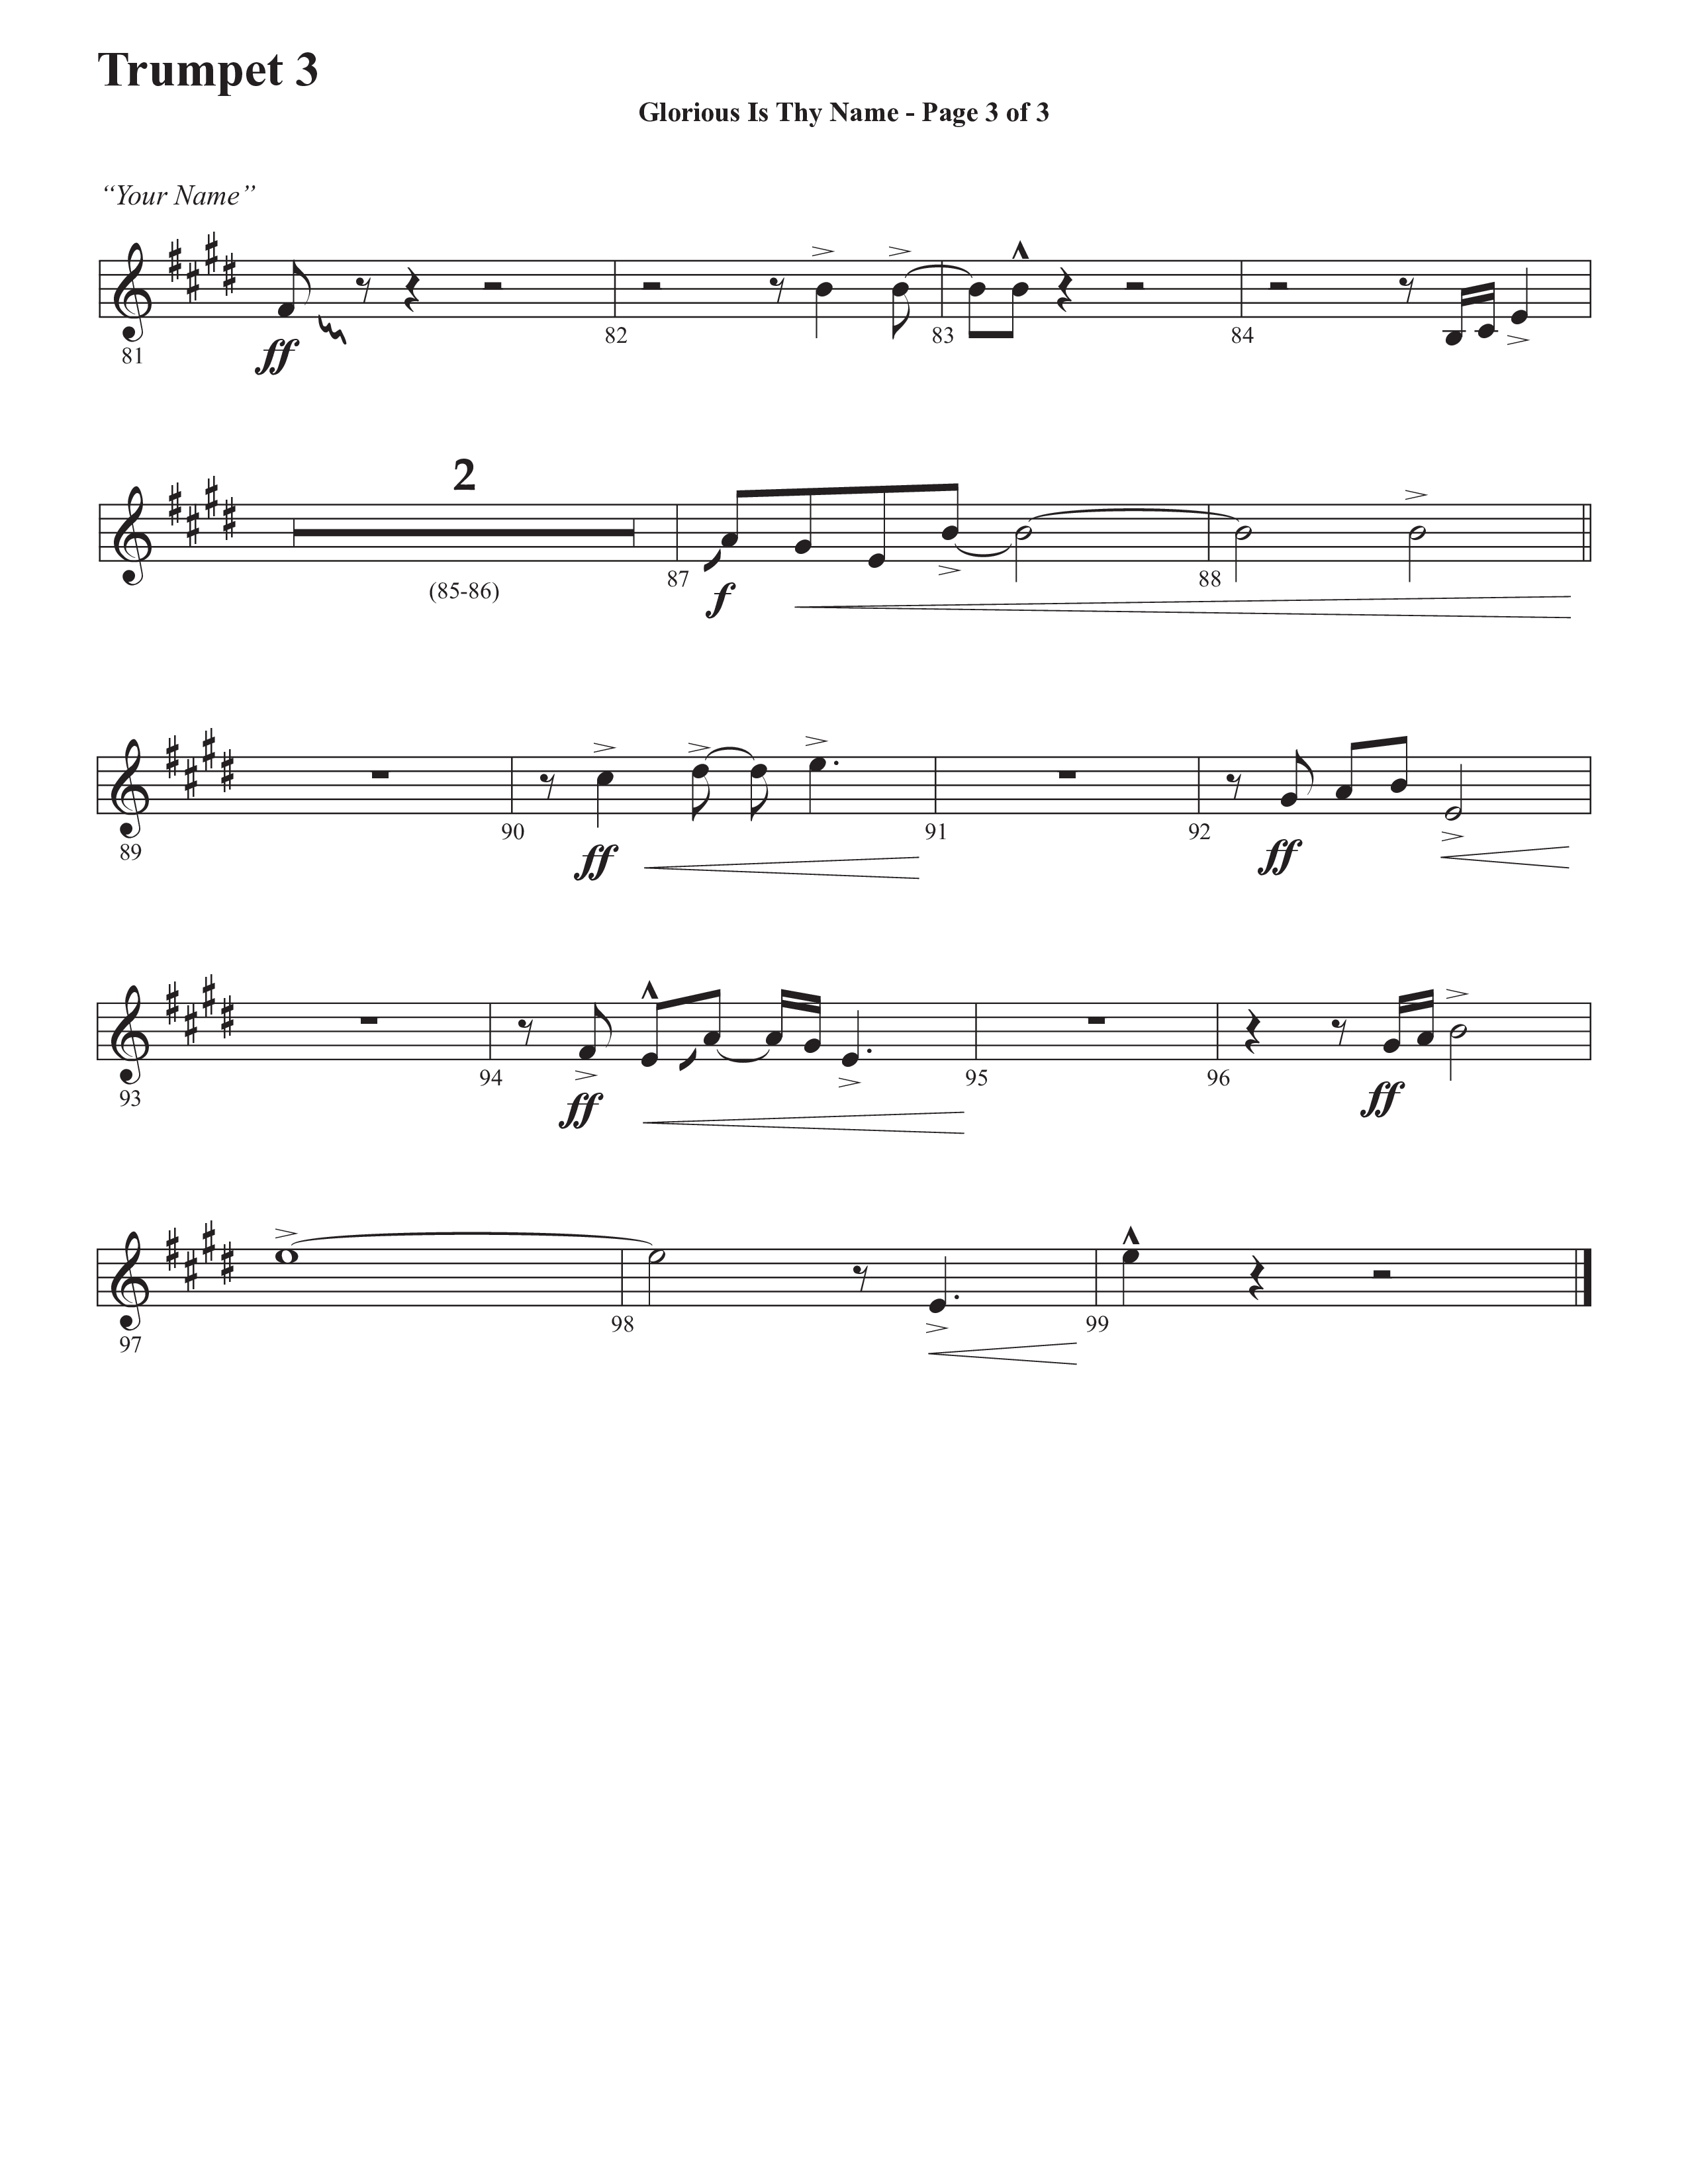 Glorious Is Thy Name (with Your Name) (Choral Anthem SATB) Trumpet 3 (Semsen Music / Arr. John Bolin / Orch. Cliff Duren)